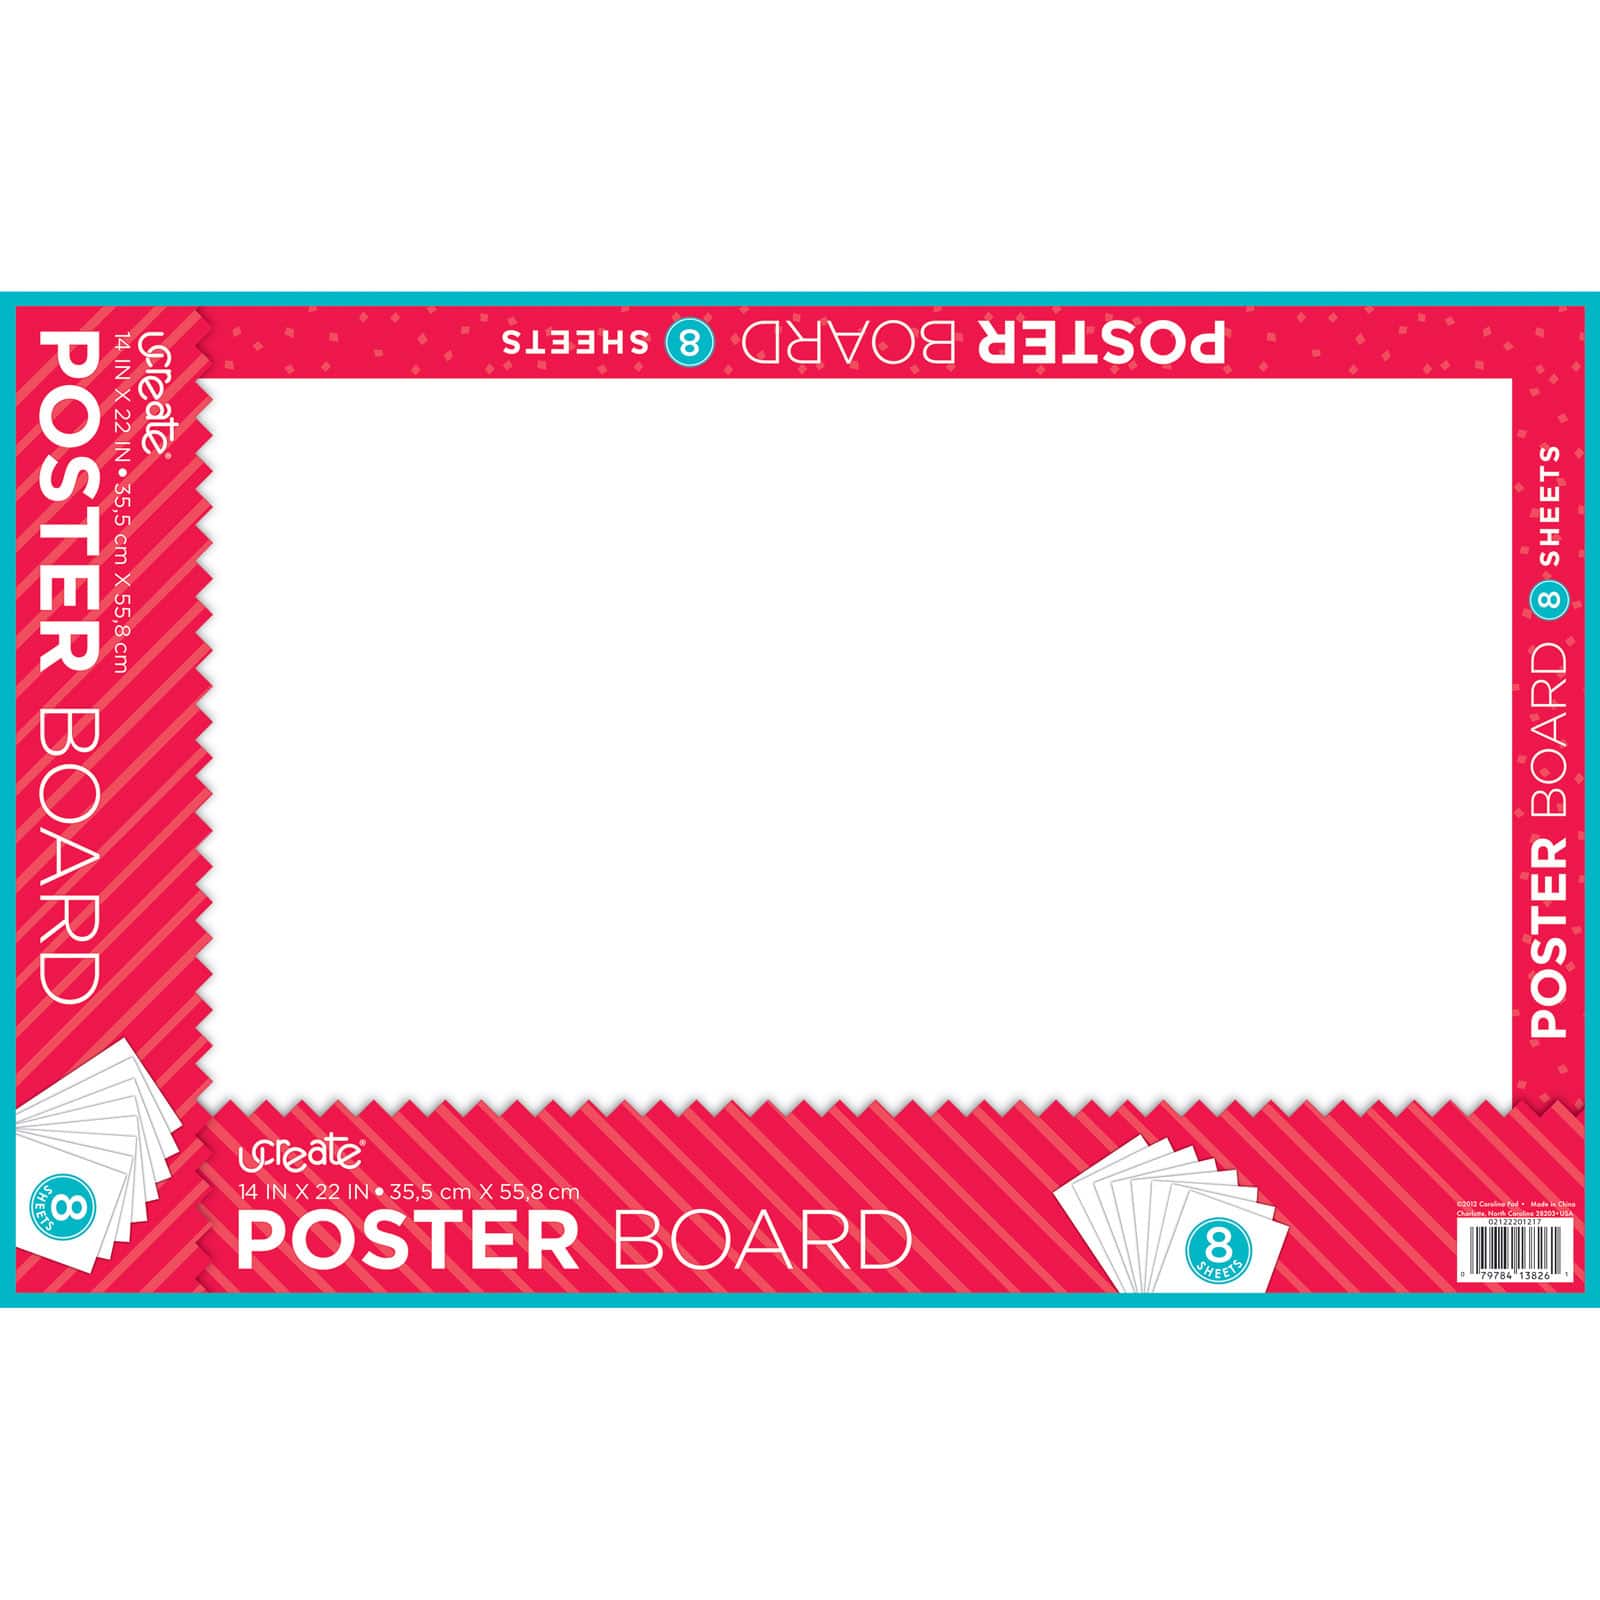 24 Pack: 22 inch x 28 inch Black Poster Board by Creatology, Size: 22” x 28”